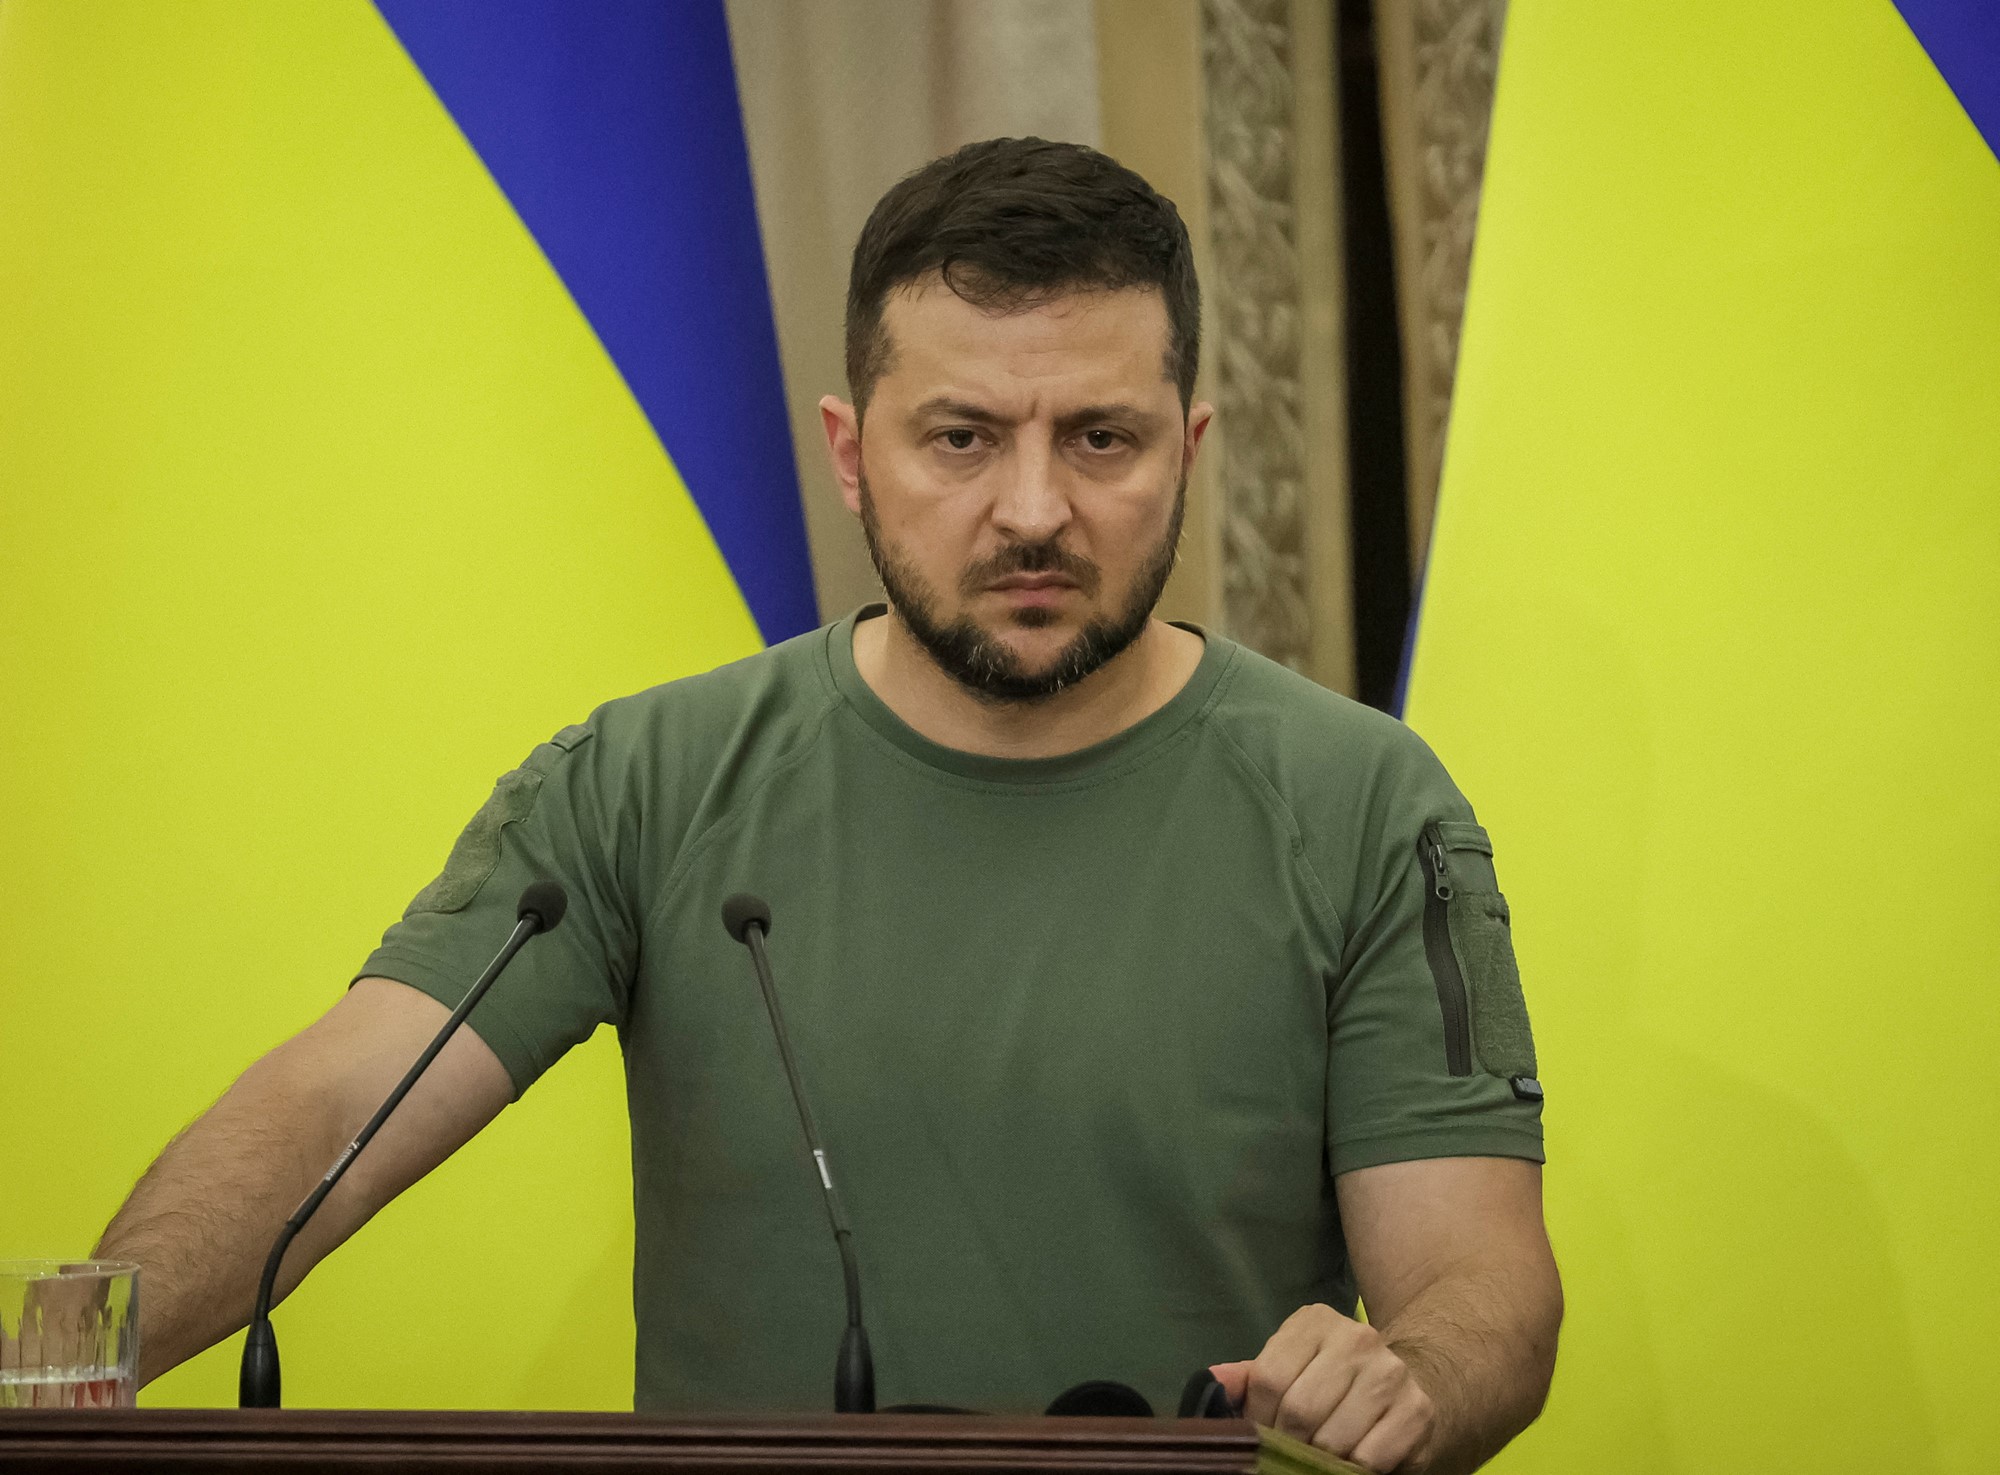 Volodymyr Zelenskyy stands behind a lecturn in front of Ukrainian flags.